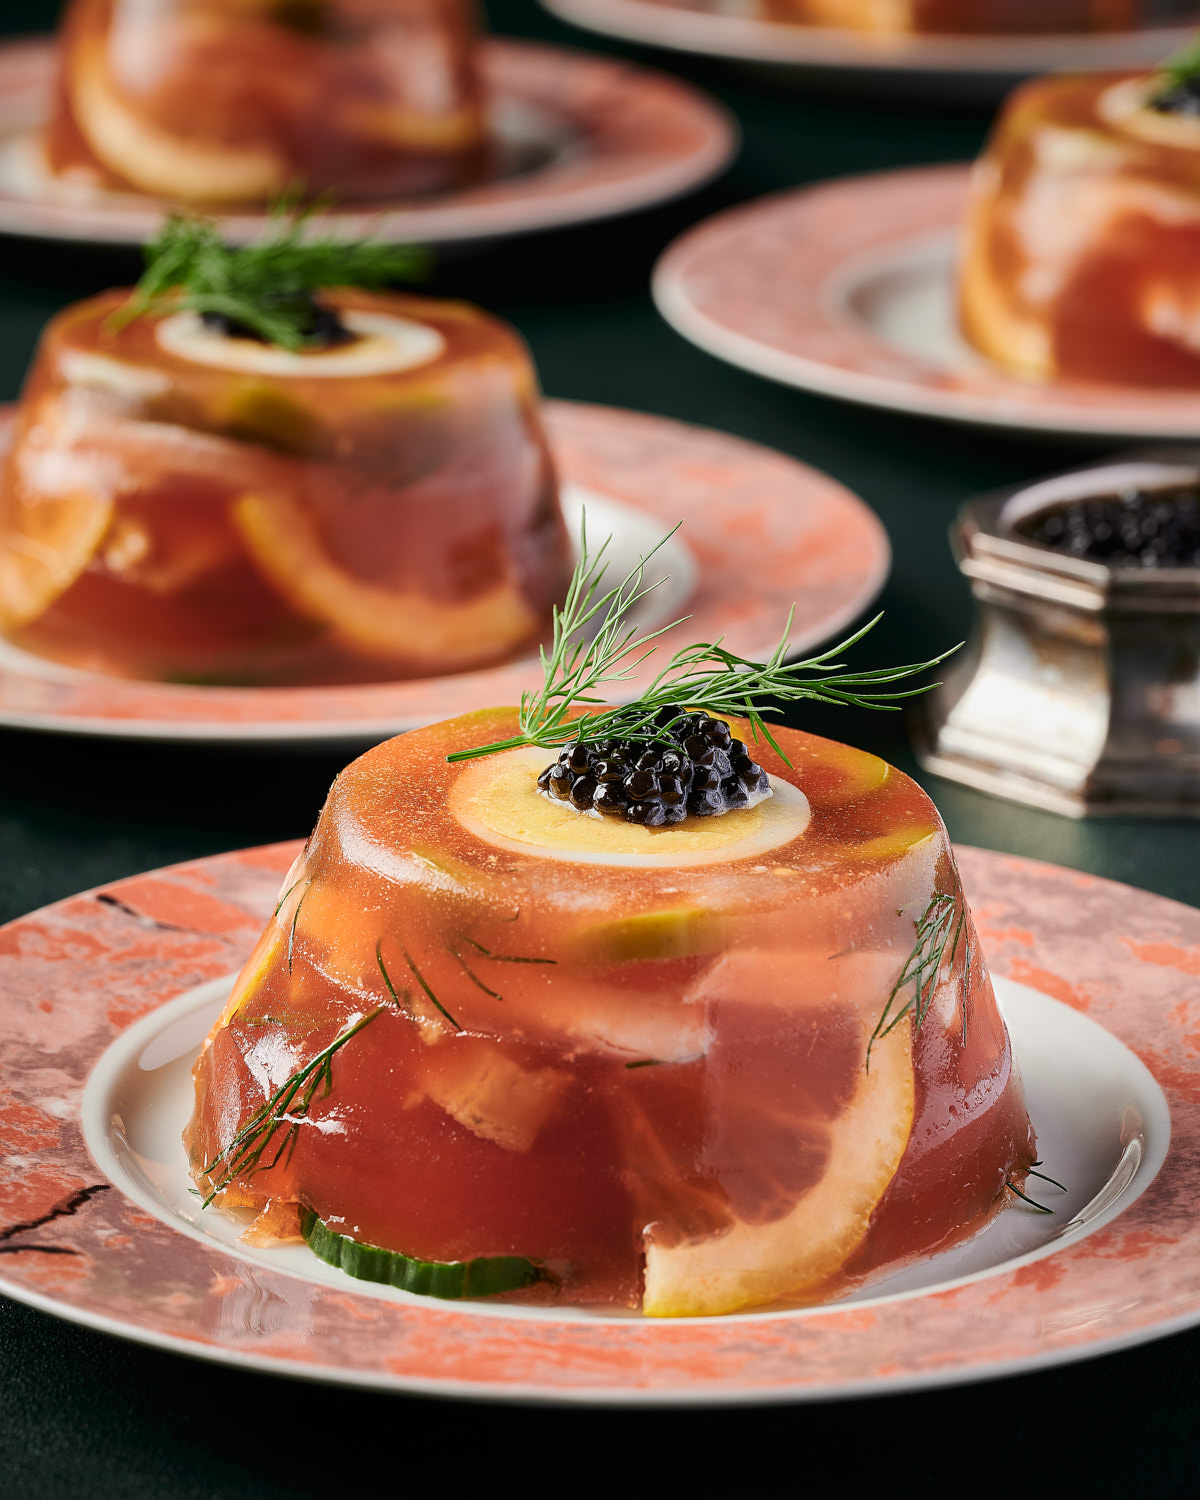 Editorial Cookbook Food Photography of Salmon Tomato Aspic